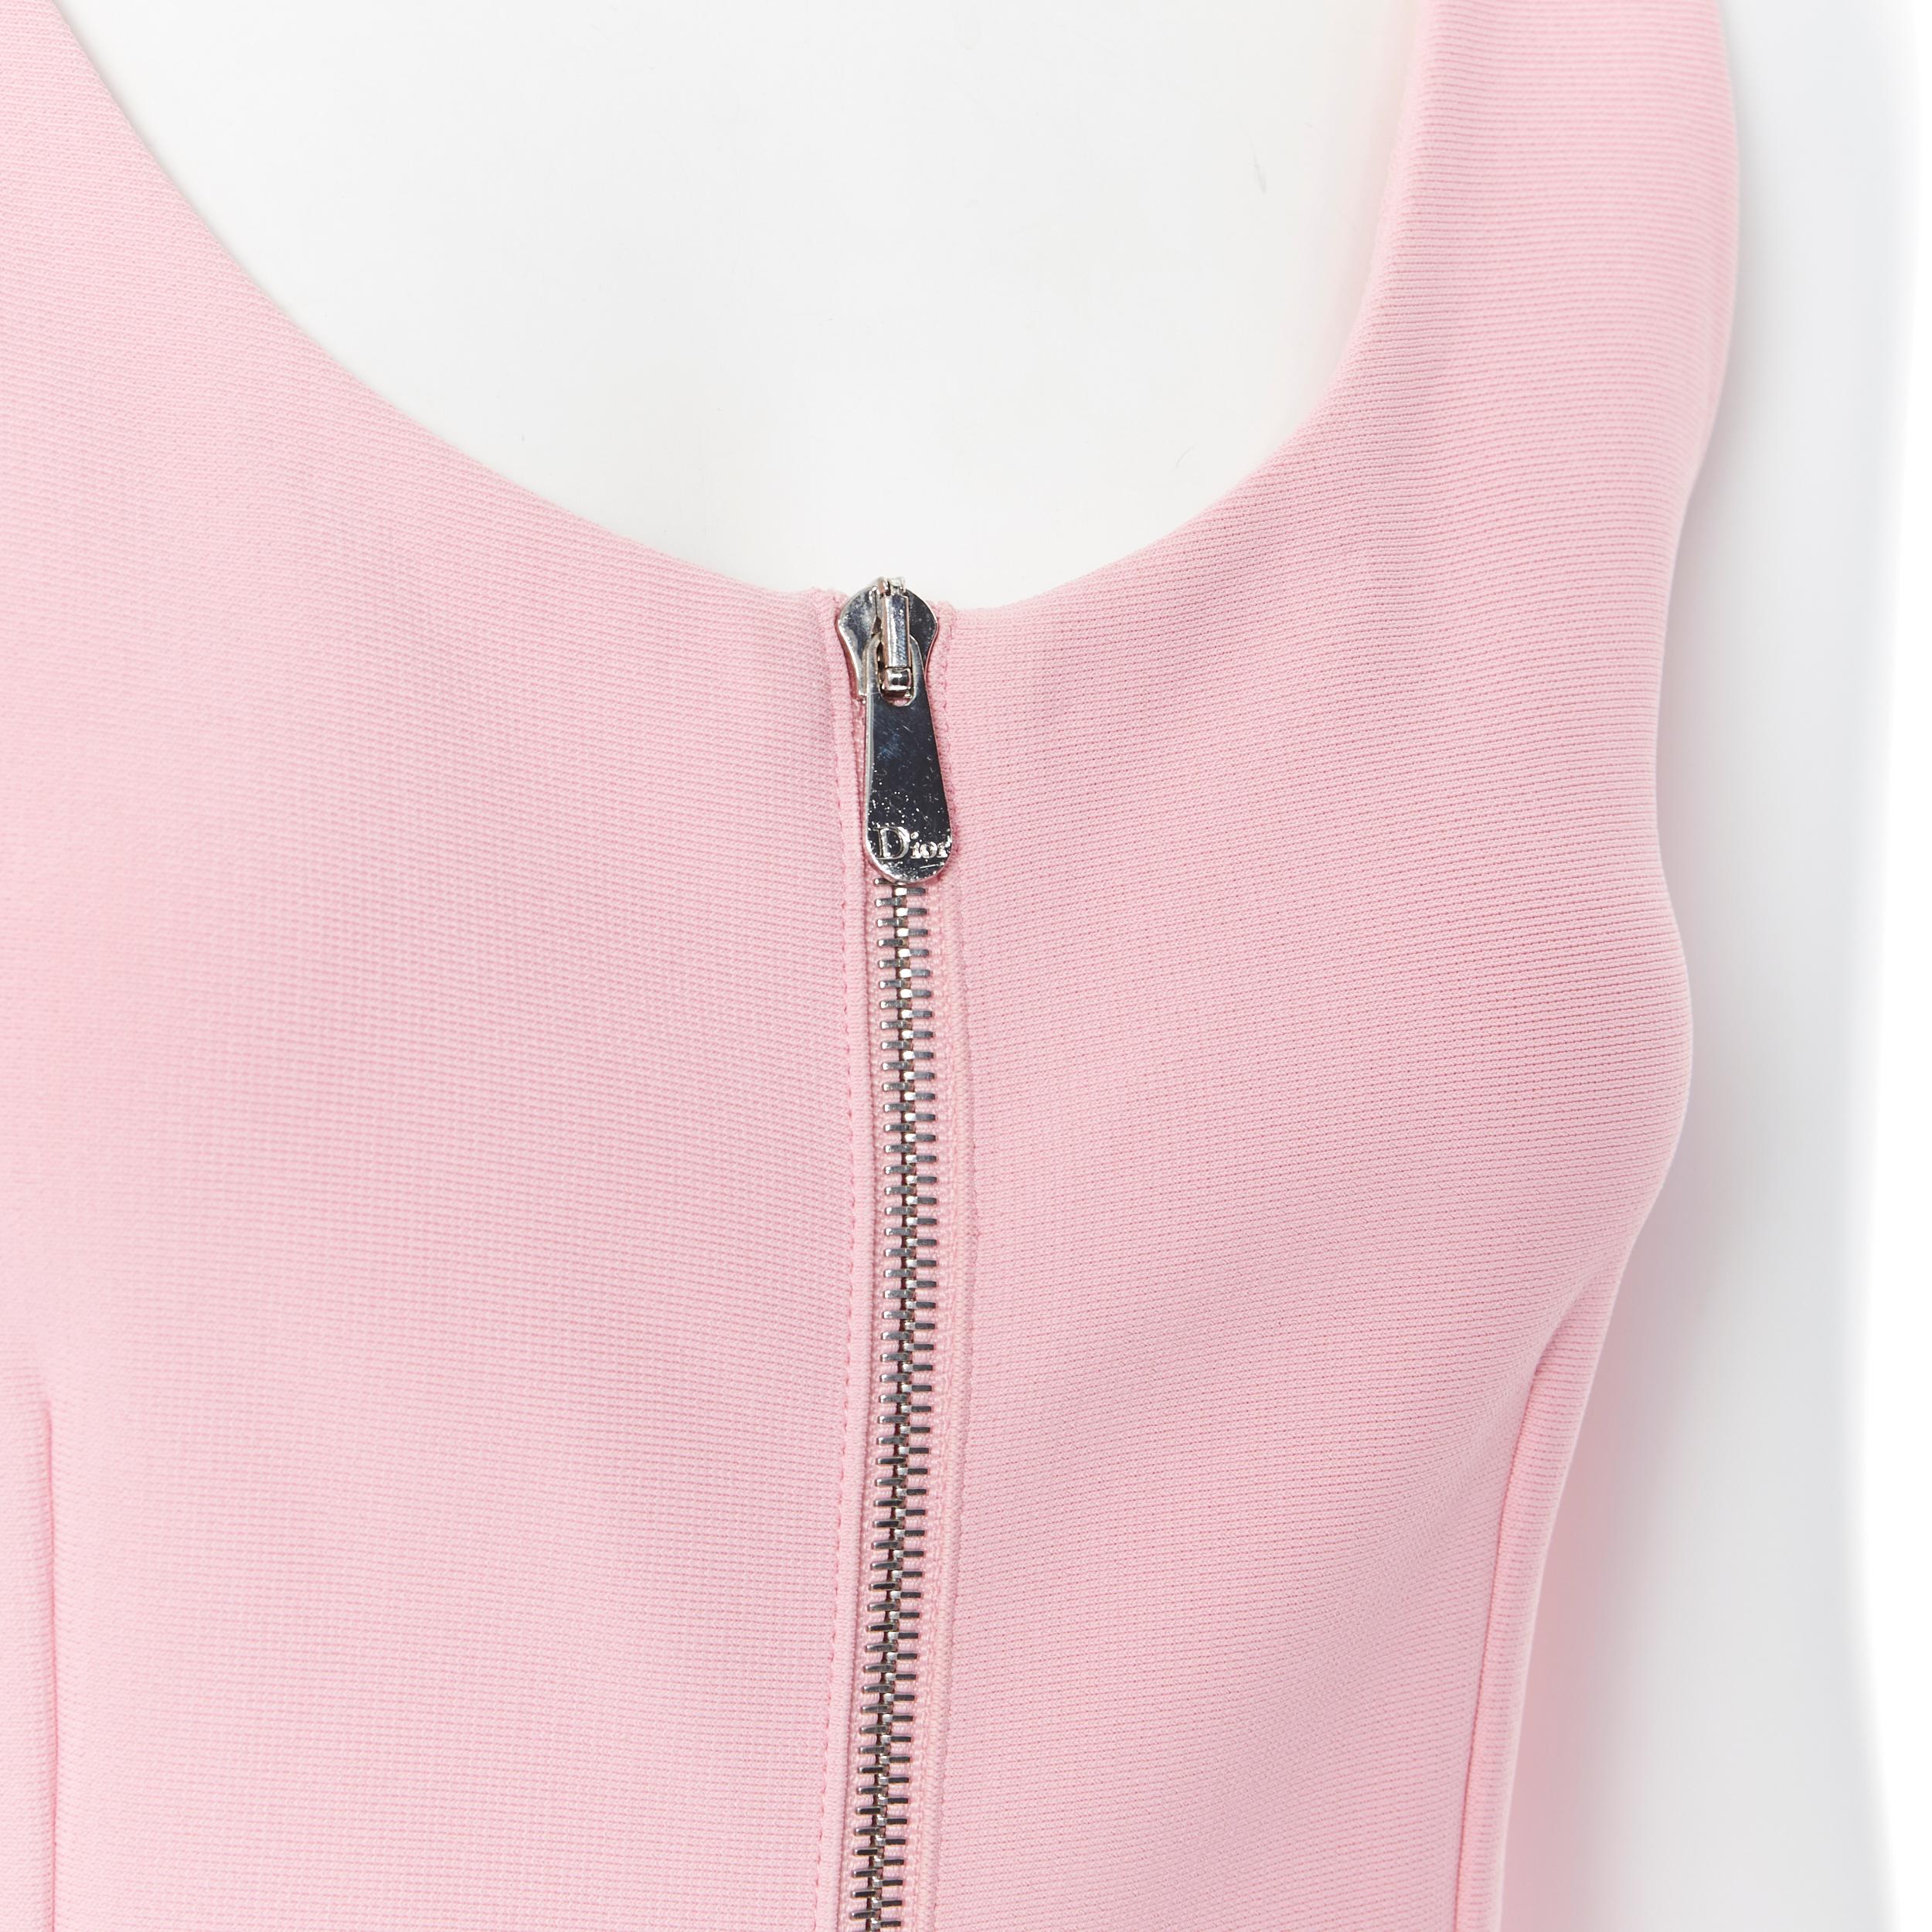 CHRISTIAN DIOR pink viscose knit exposed zip nipped waist bodycon dress FR36
Brand: Christian Dior
Model Name / Style: Cocktail dress
Material: Viscose knit
Color: Pink
Pattern: Solid
Closure: Zip
Extra Detail: Dior signed zipper pull. Nipped waist.